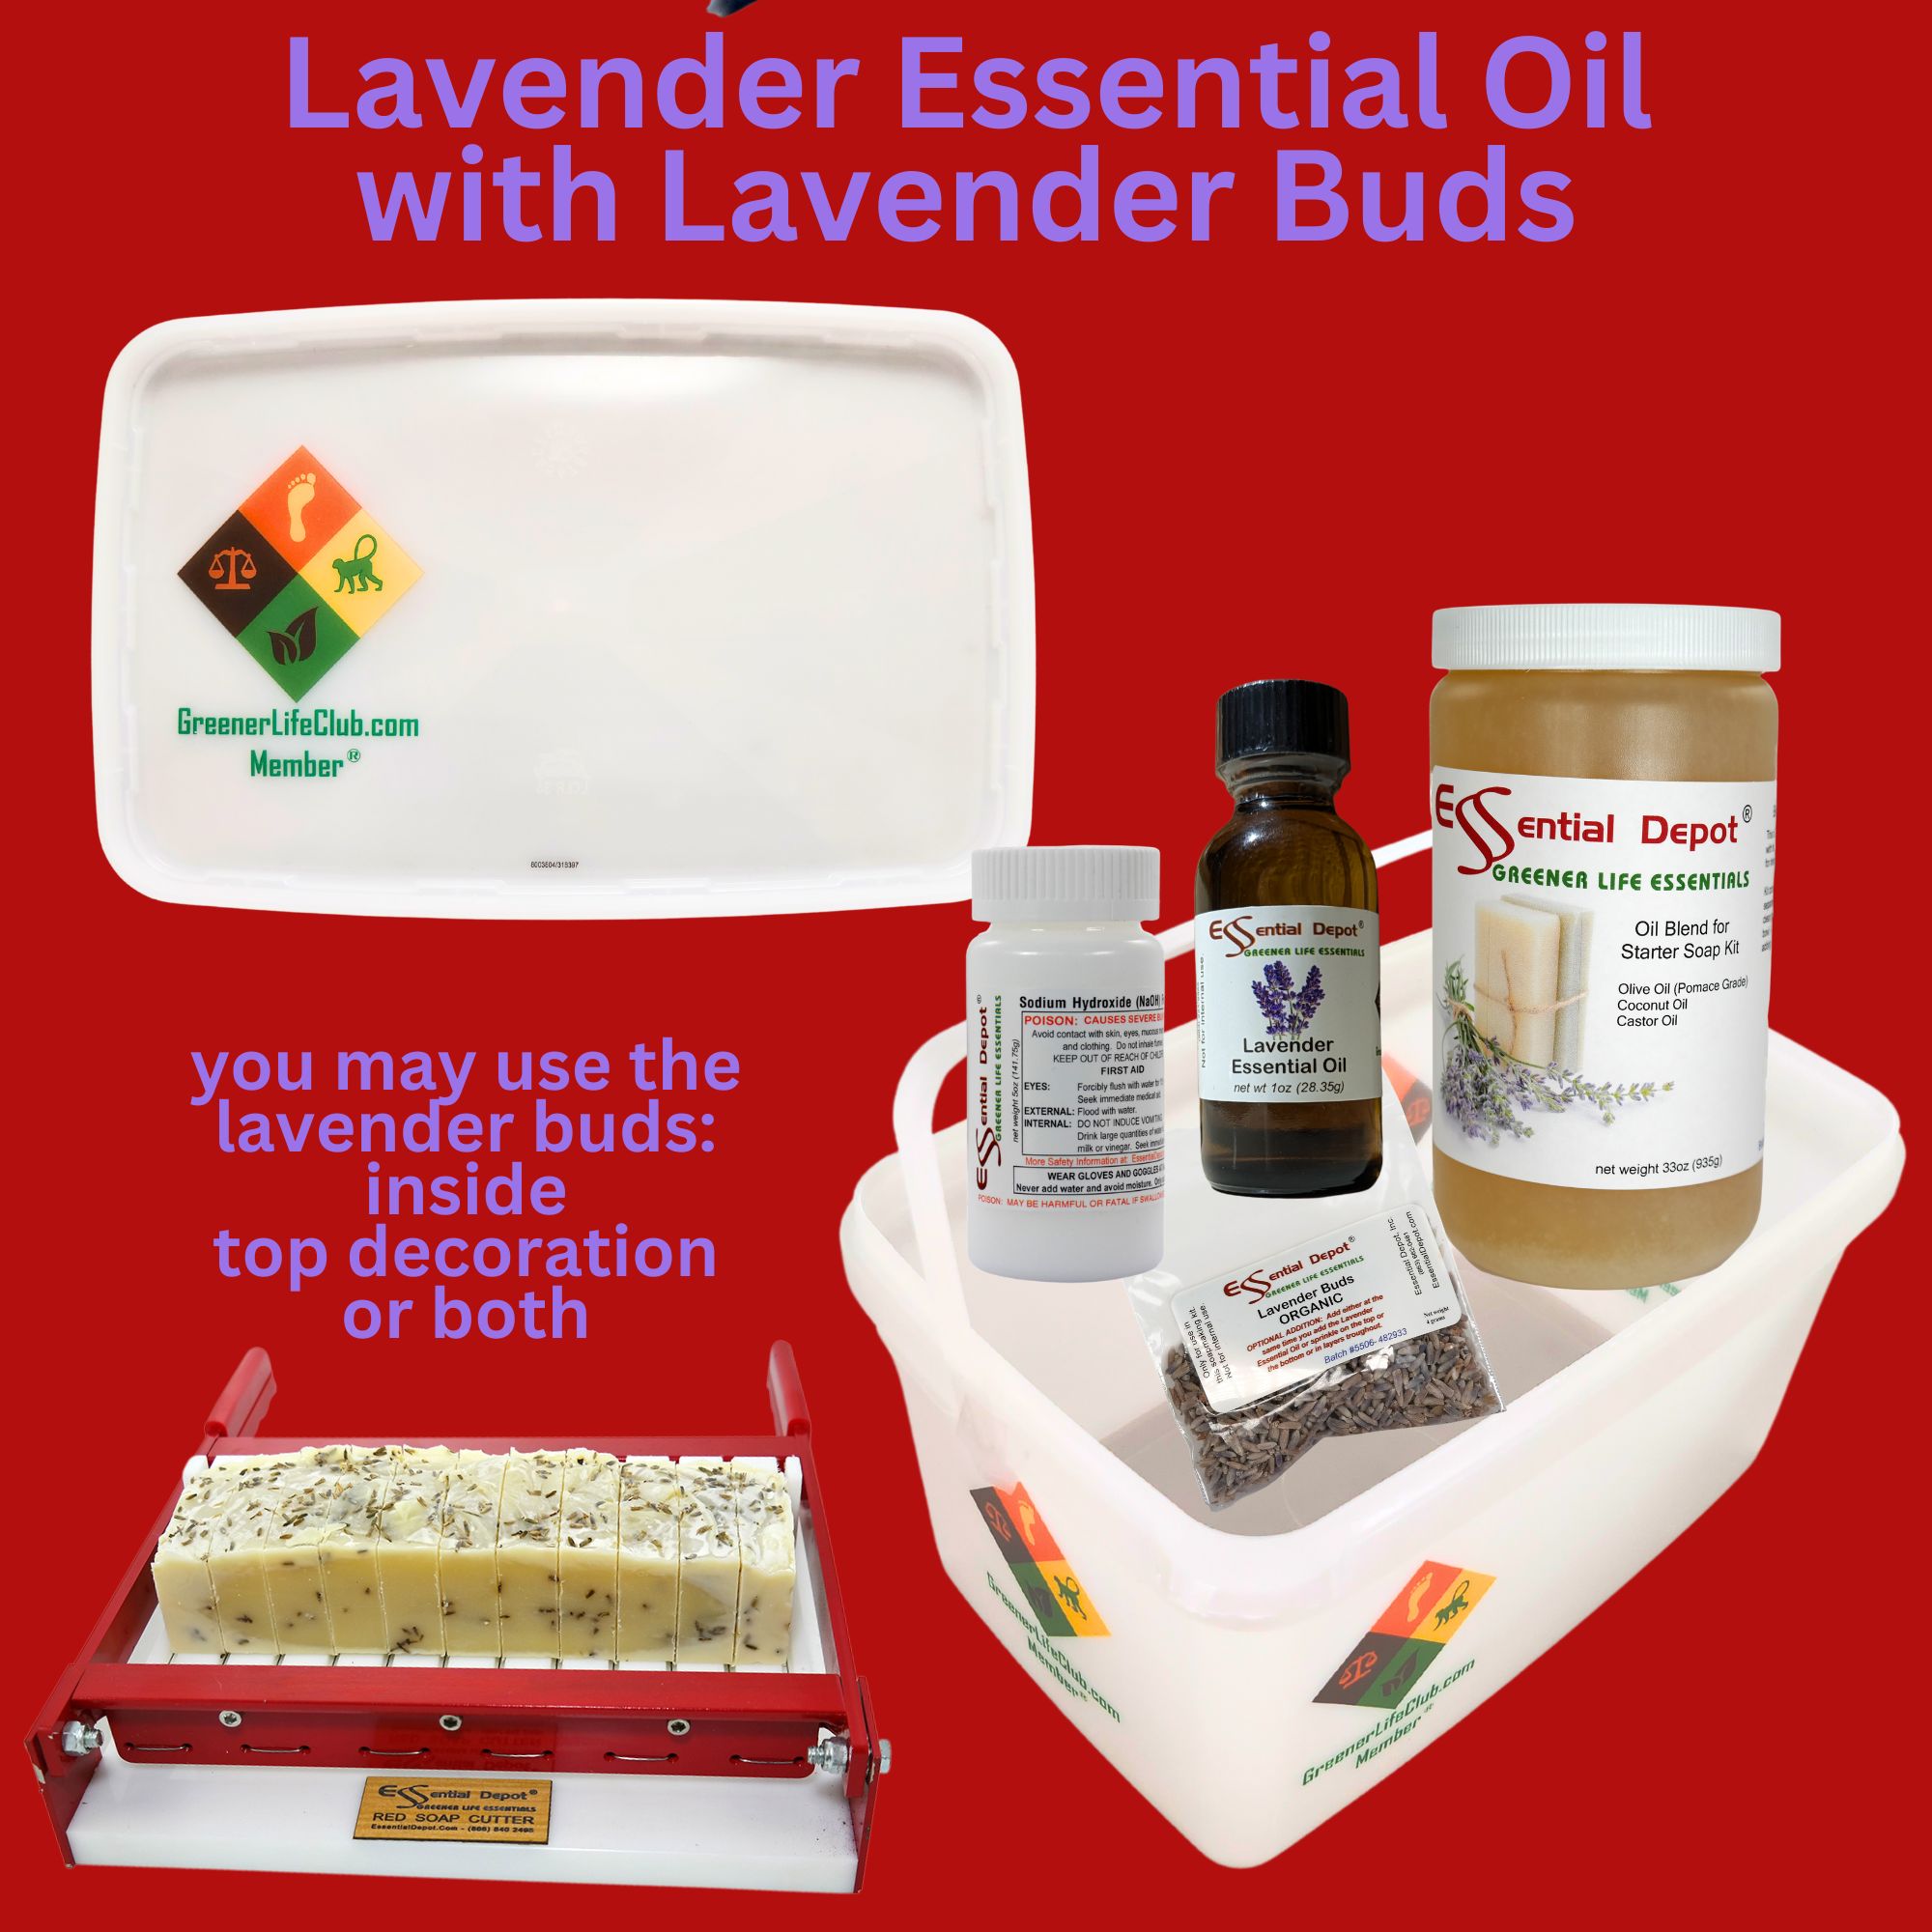 Lavender Essential Oil with Lavender Buds